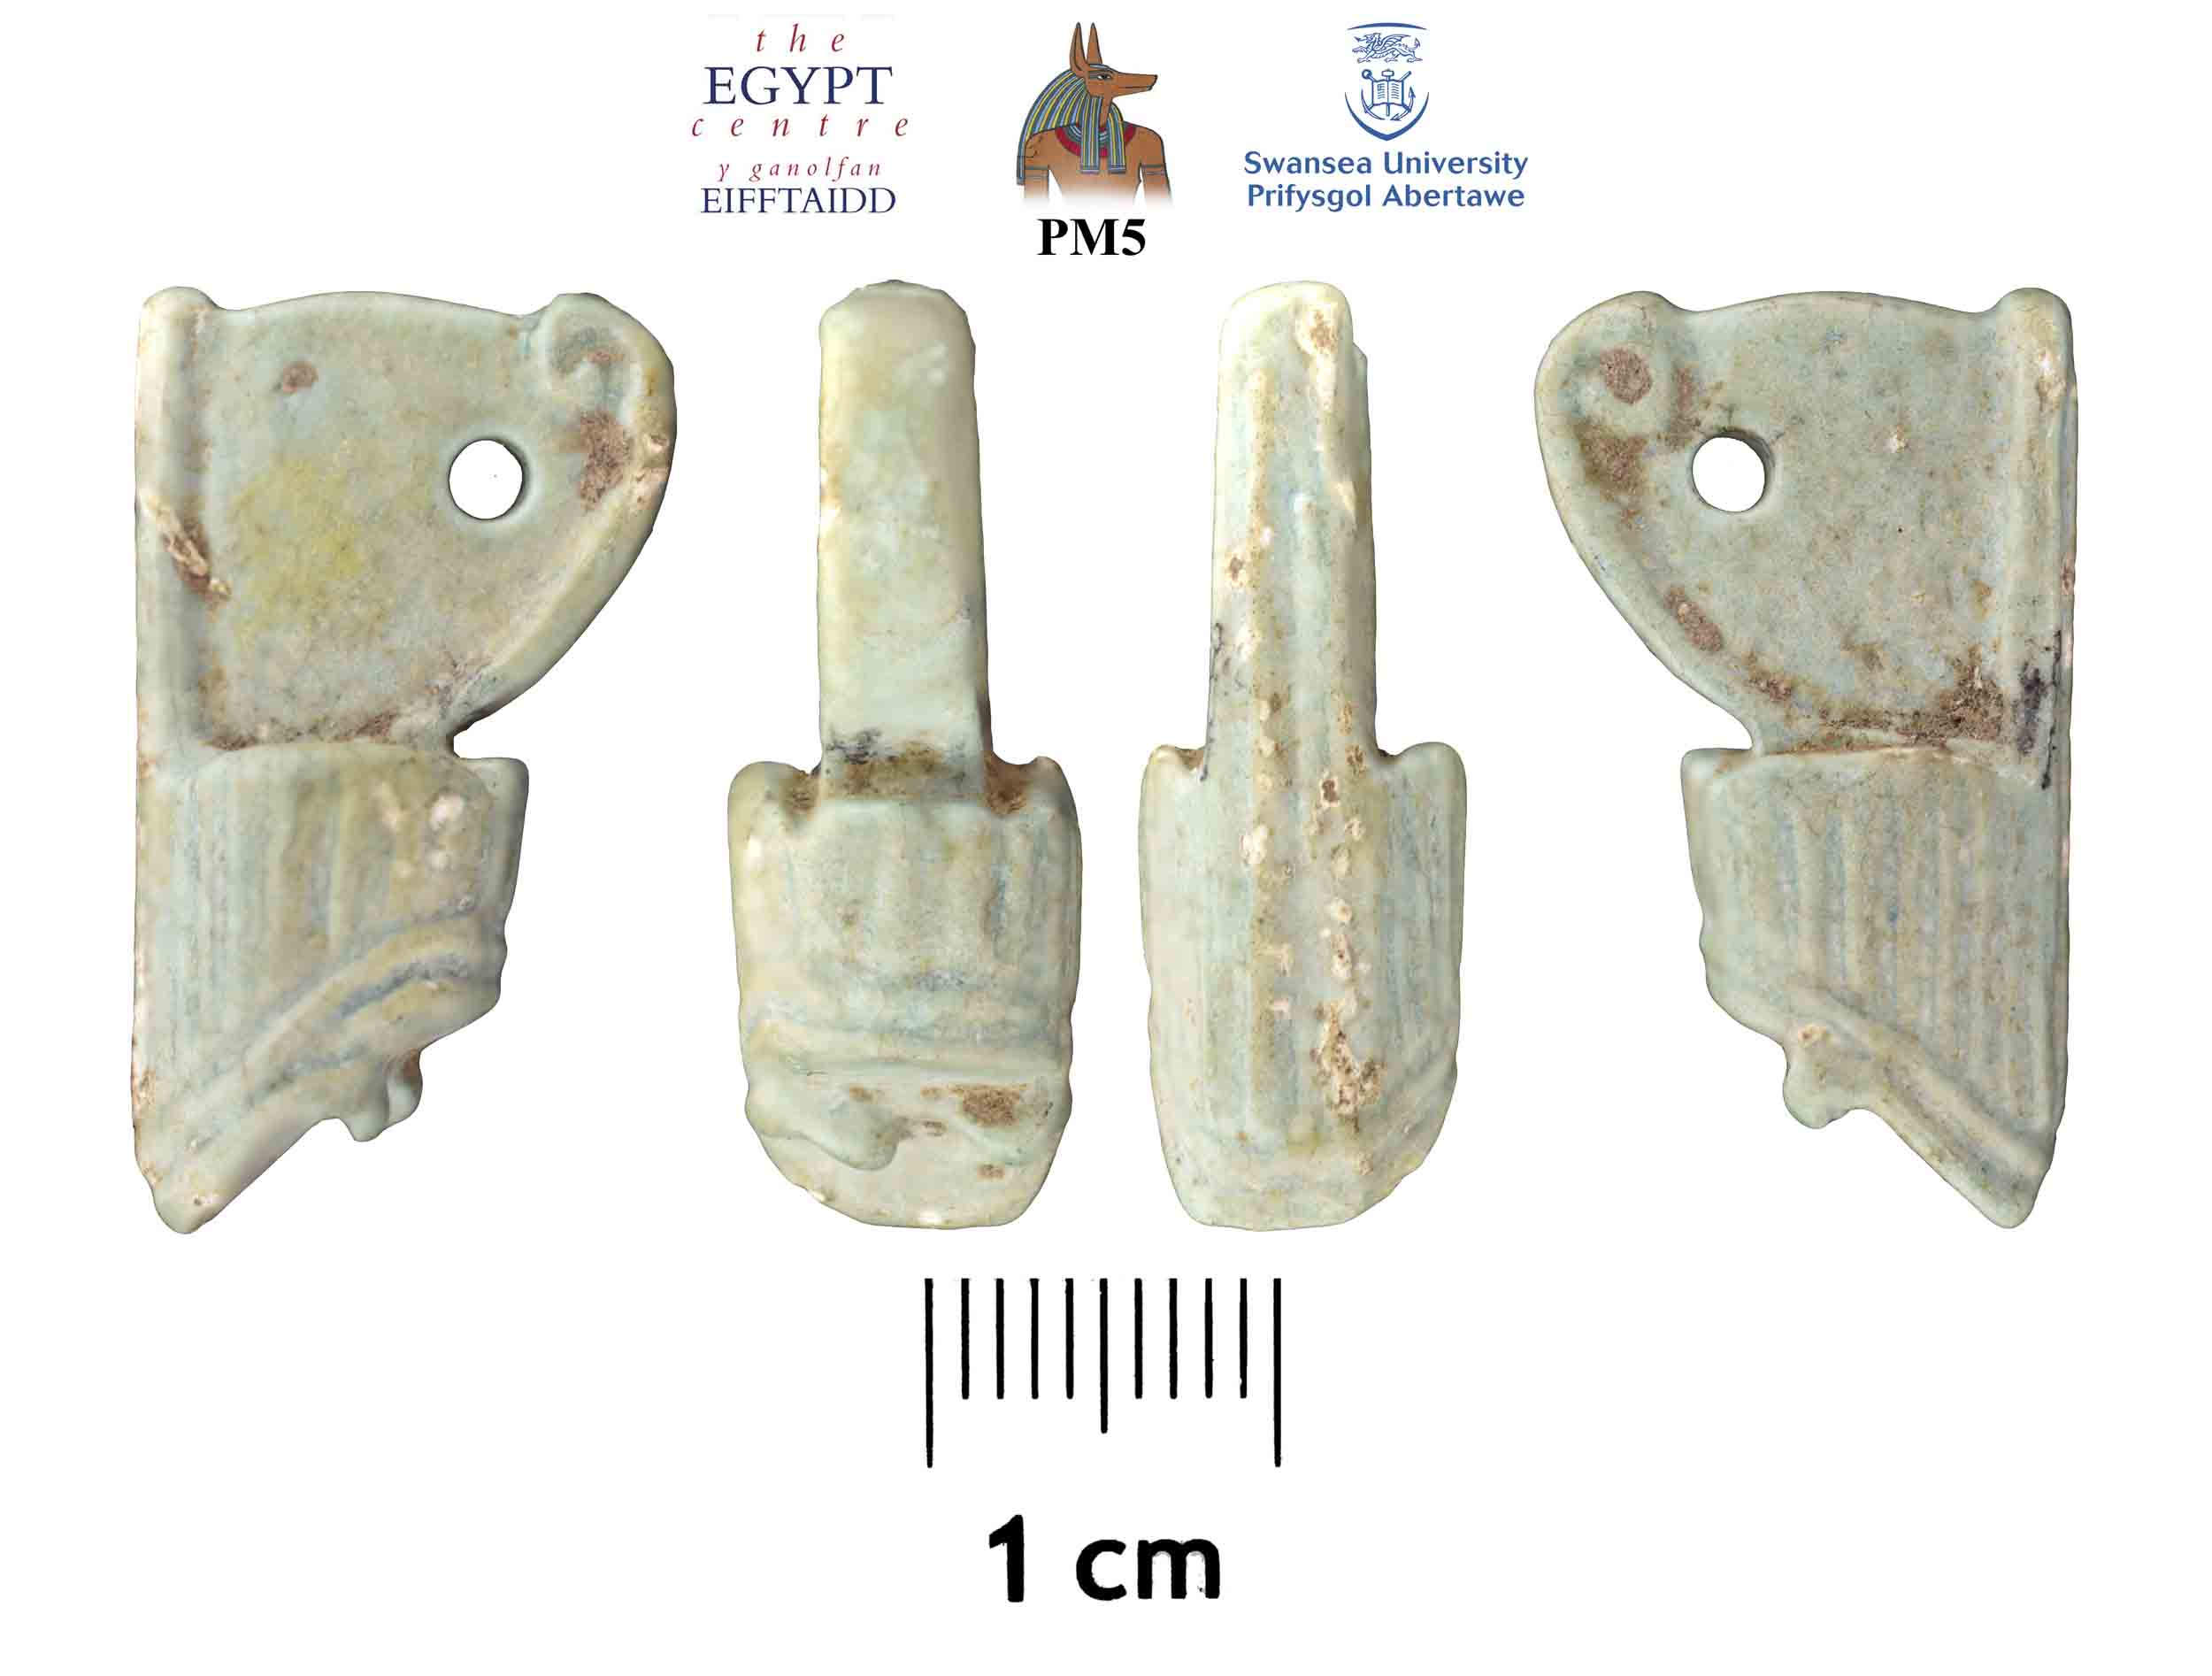 Image for: Faience amulet of the red crown of Lower Egypt